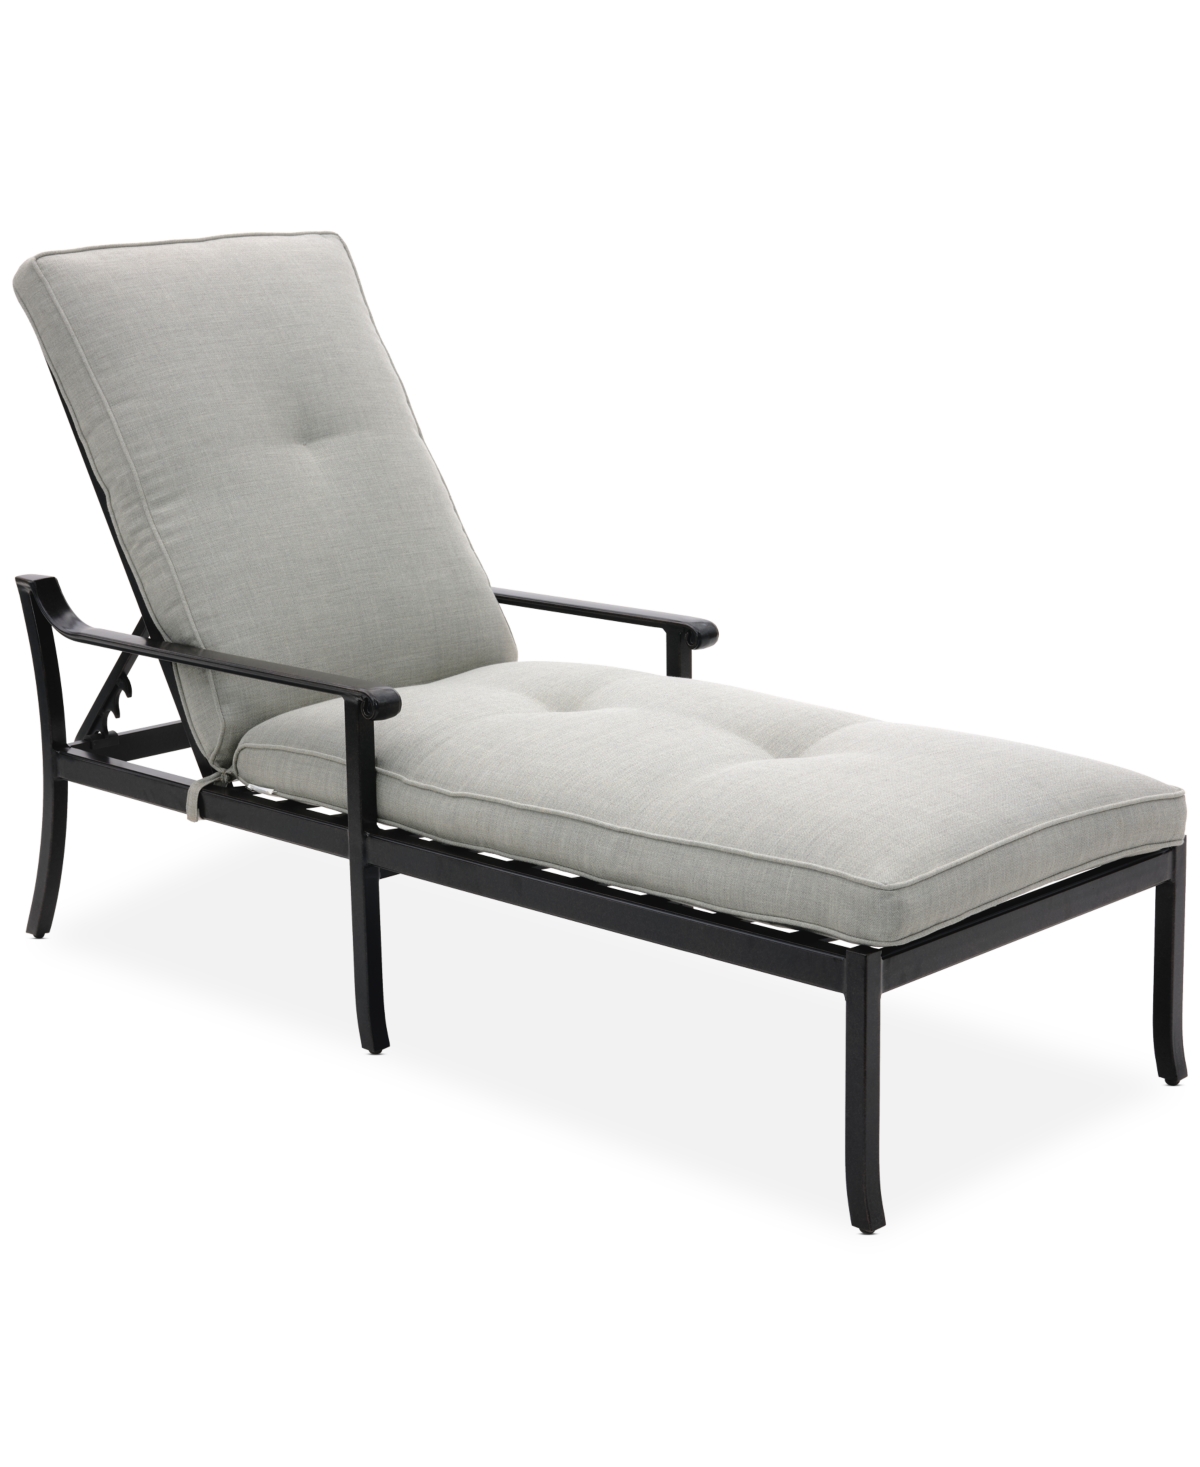 Agio Wythburn Mix And Match Scroll Outdoor Chaise Lounge In Oyster Light Grey,pewter Finish